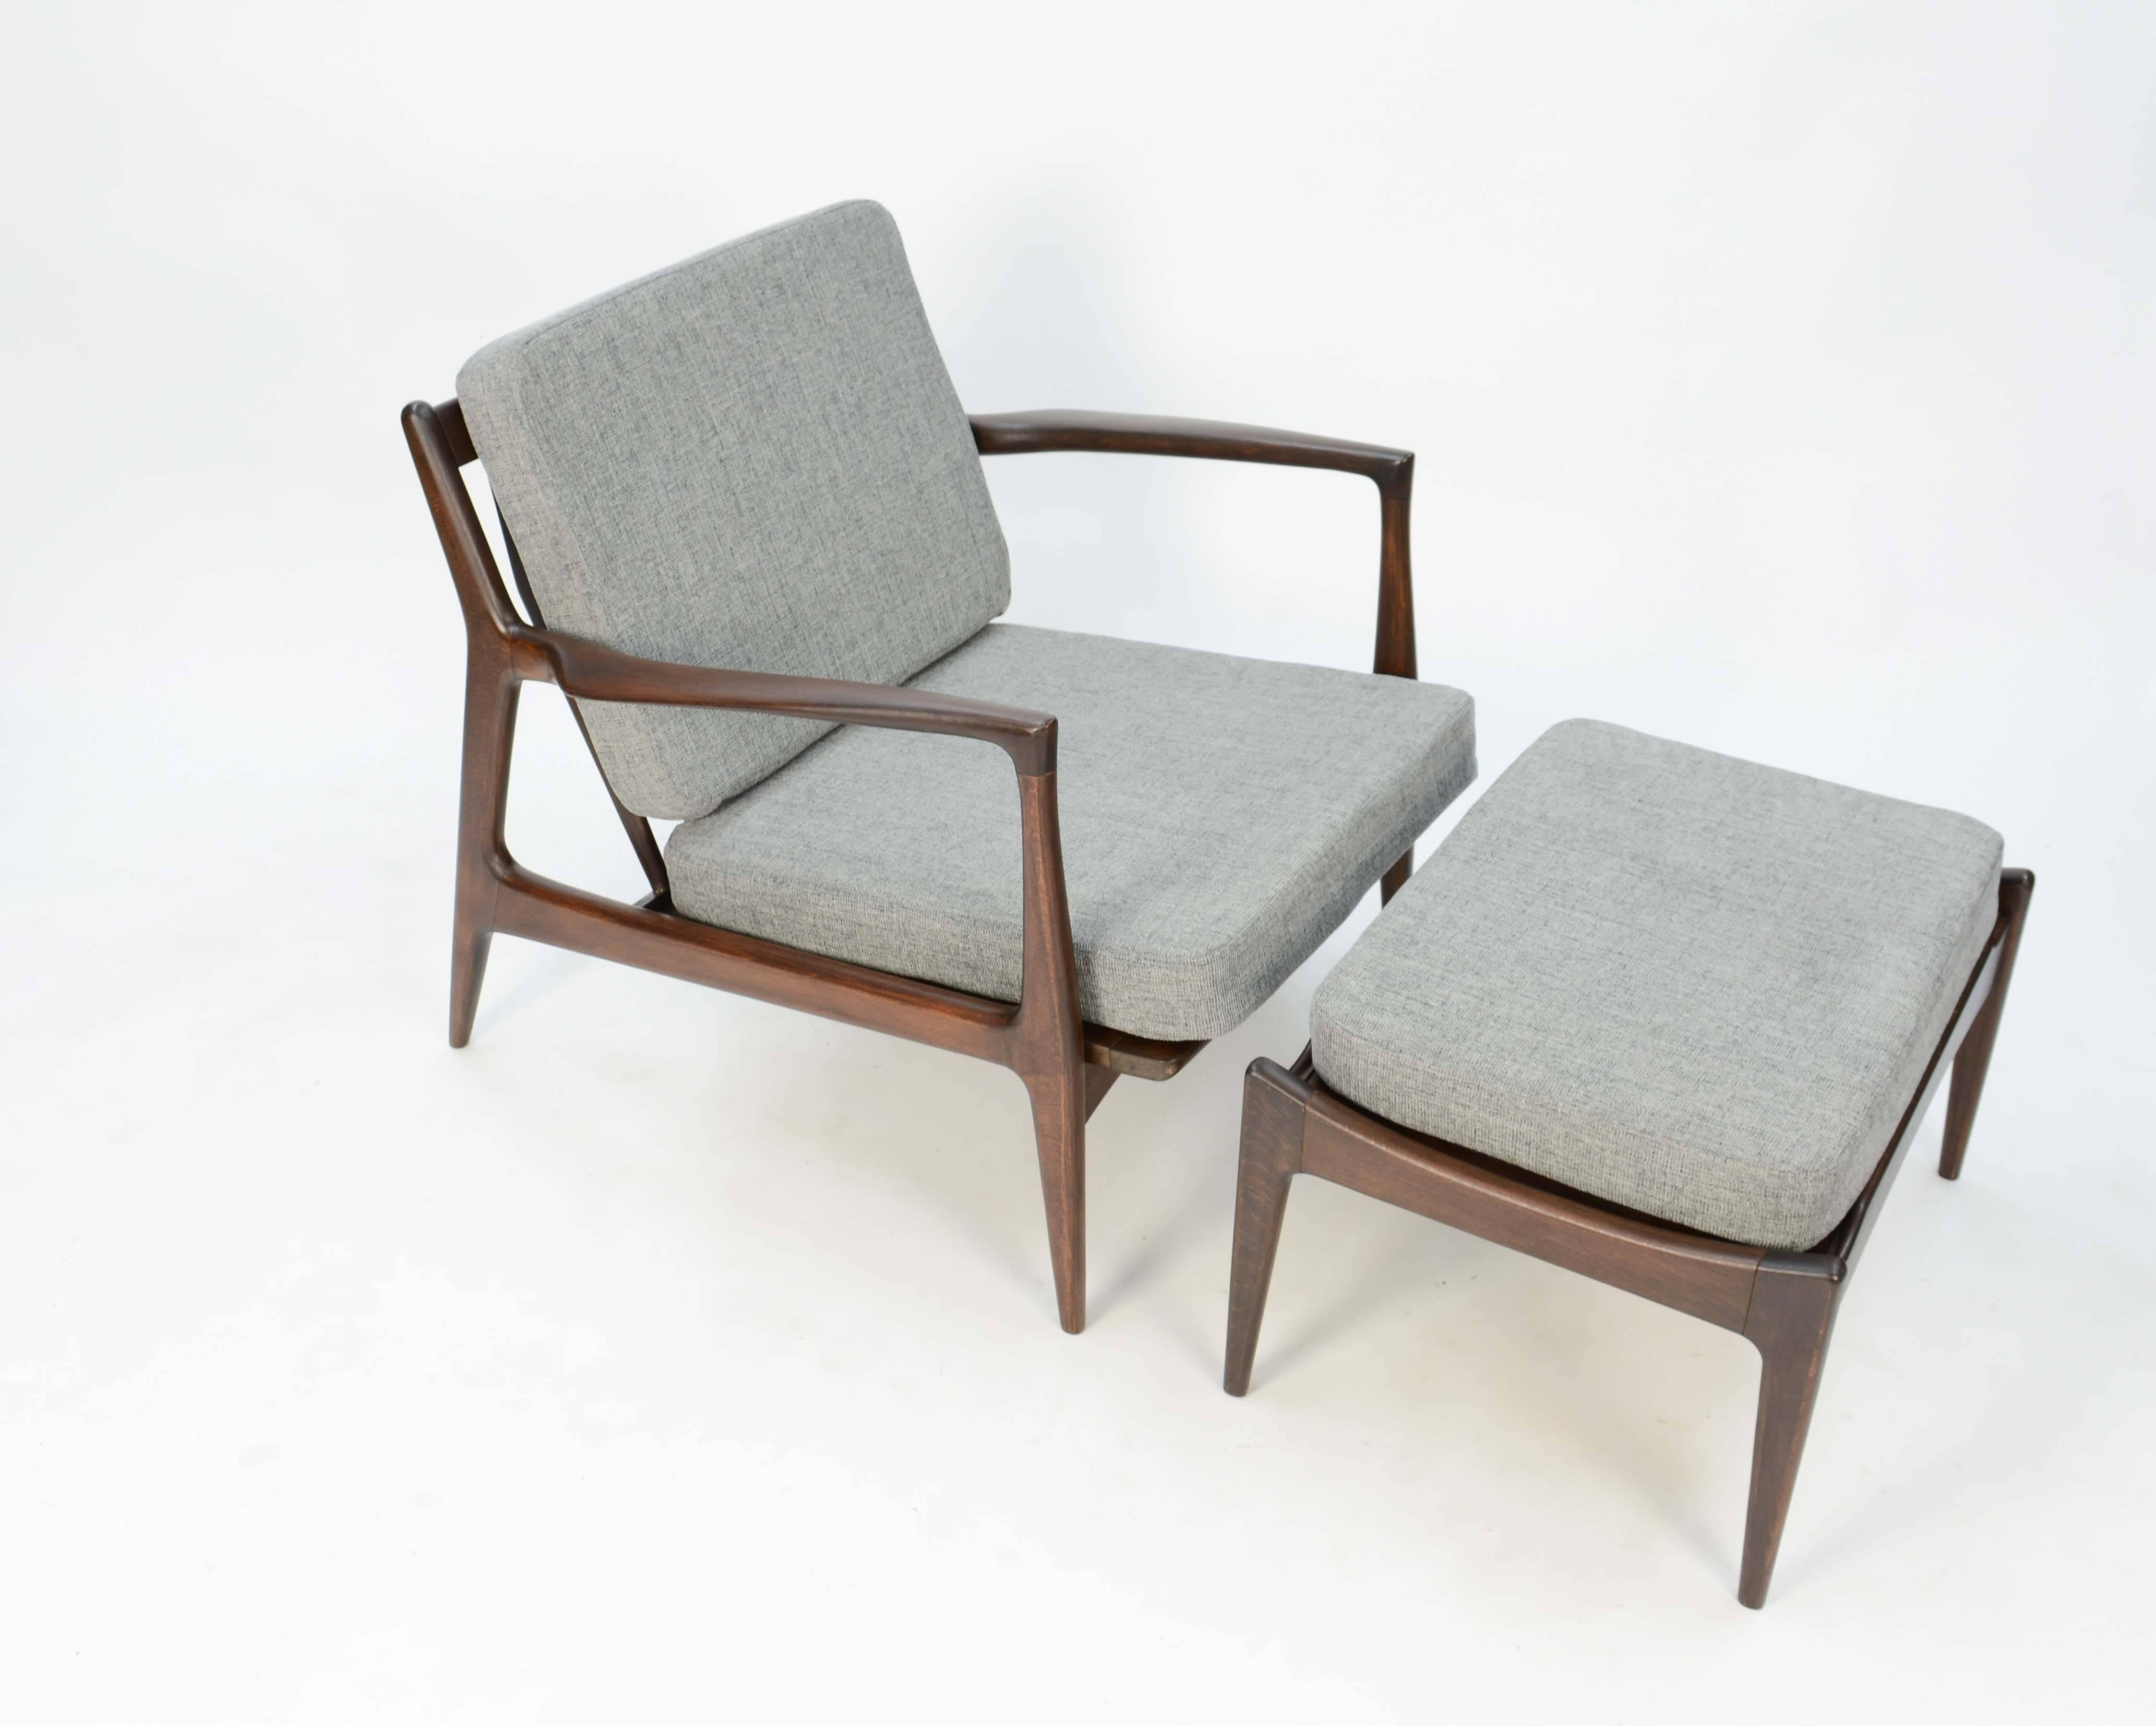 A wonderful set of club chair and ottoman for Sleig of Denmark. The flaired arms and diamond spindled back speak to the refinement of design by the Danish designer. A wonderful set that has been completely redo from the ground up. Seat height is 16